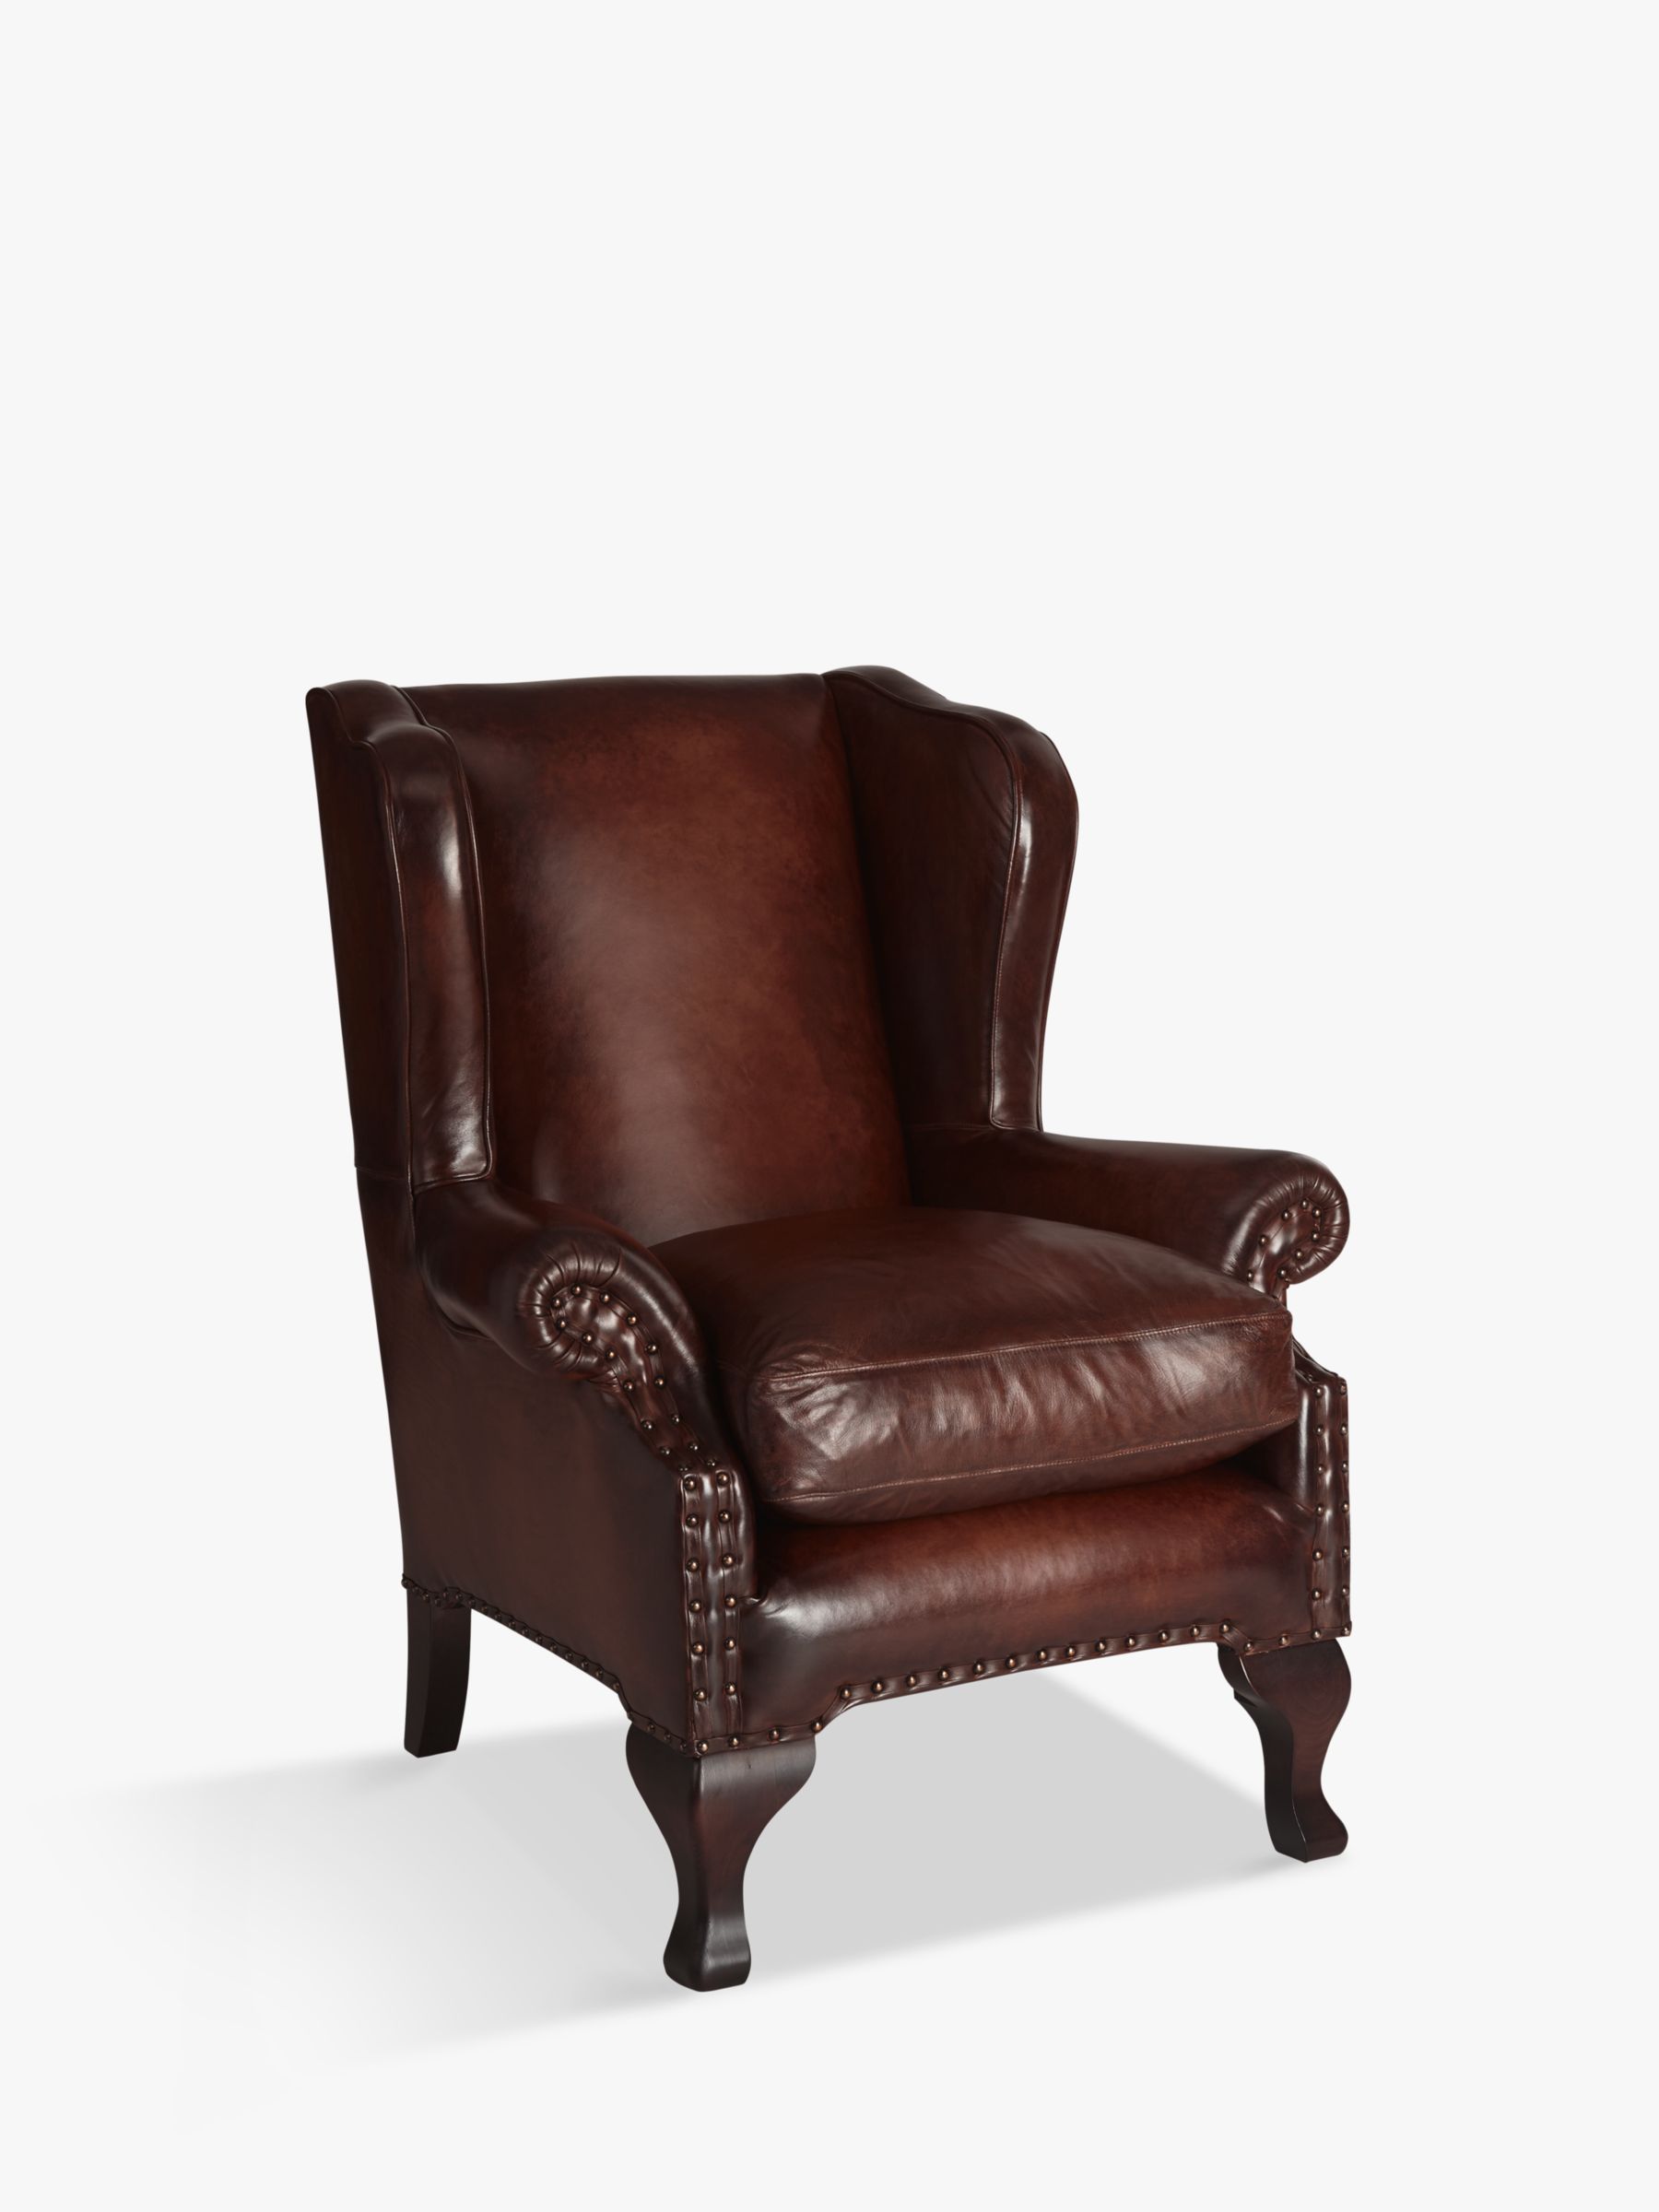 John Lewis Compton Leather Wing Chair, Antiqued